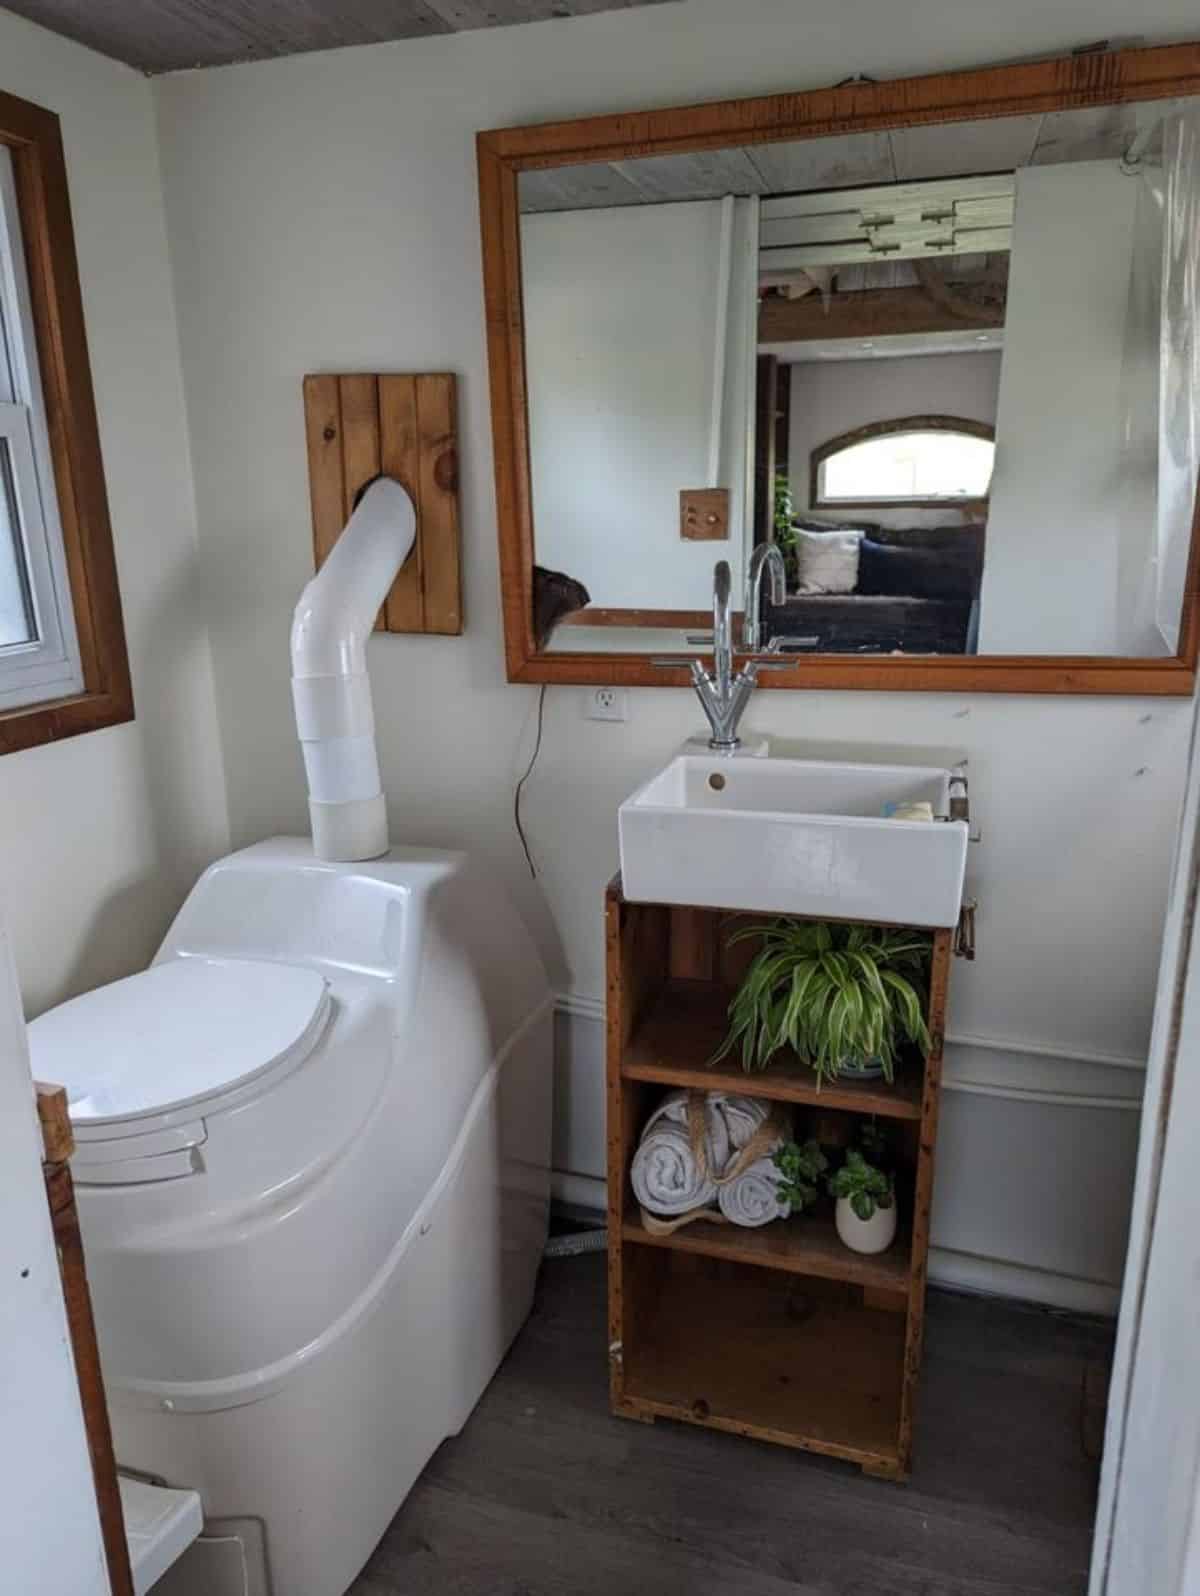 bathroom of off grid tiny home has a composting toilet, sink with vanity & mirror